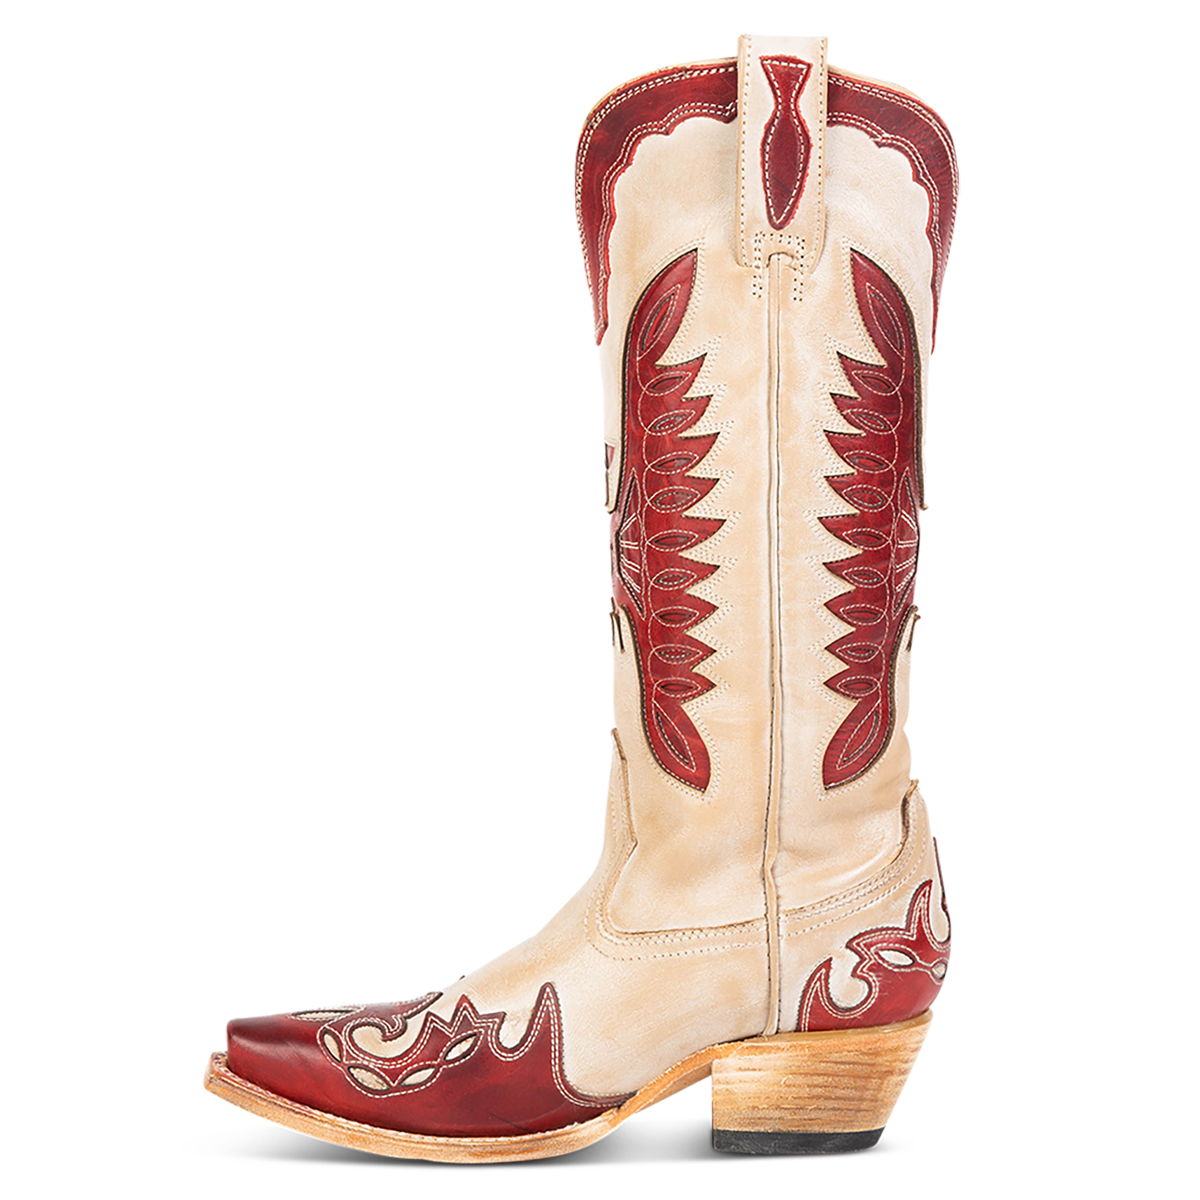 Side view showing textured design, stitch detailing and pull straps on FREEBIRD women's Willie beige red multi western leather boot